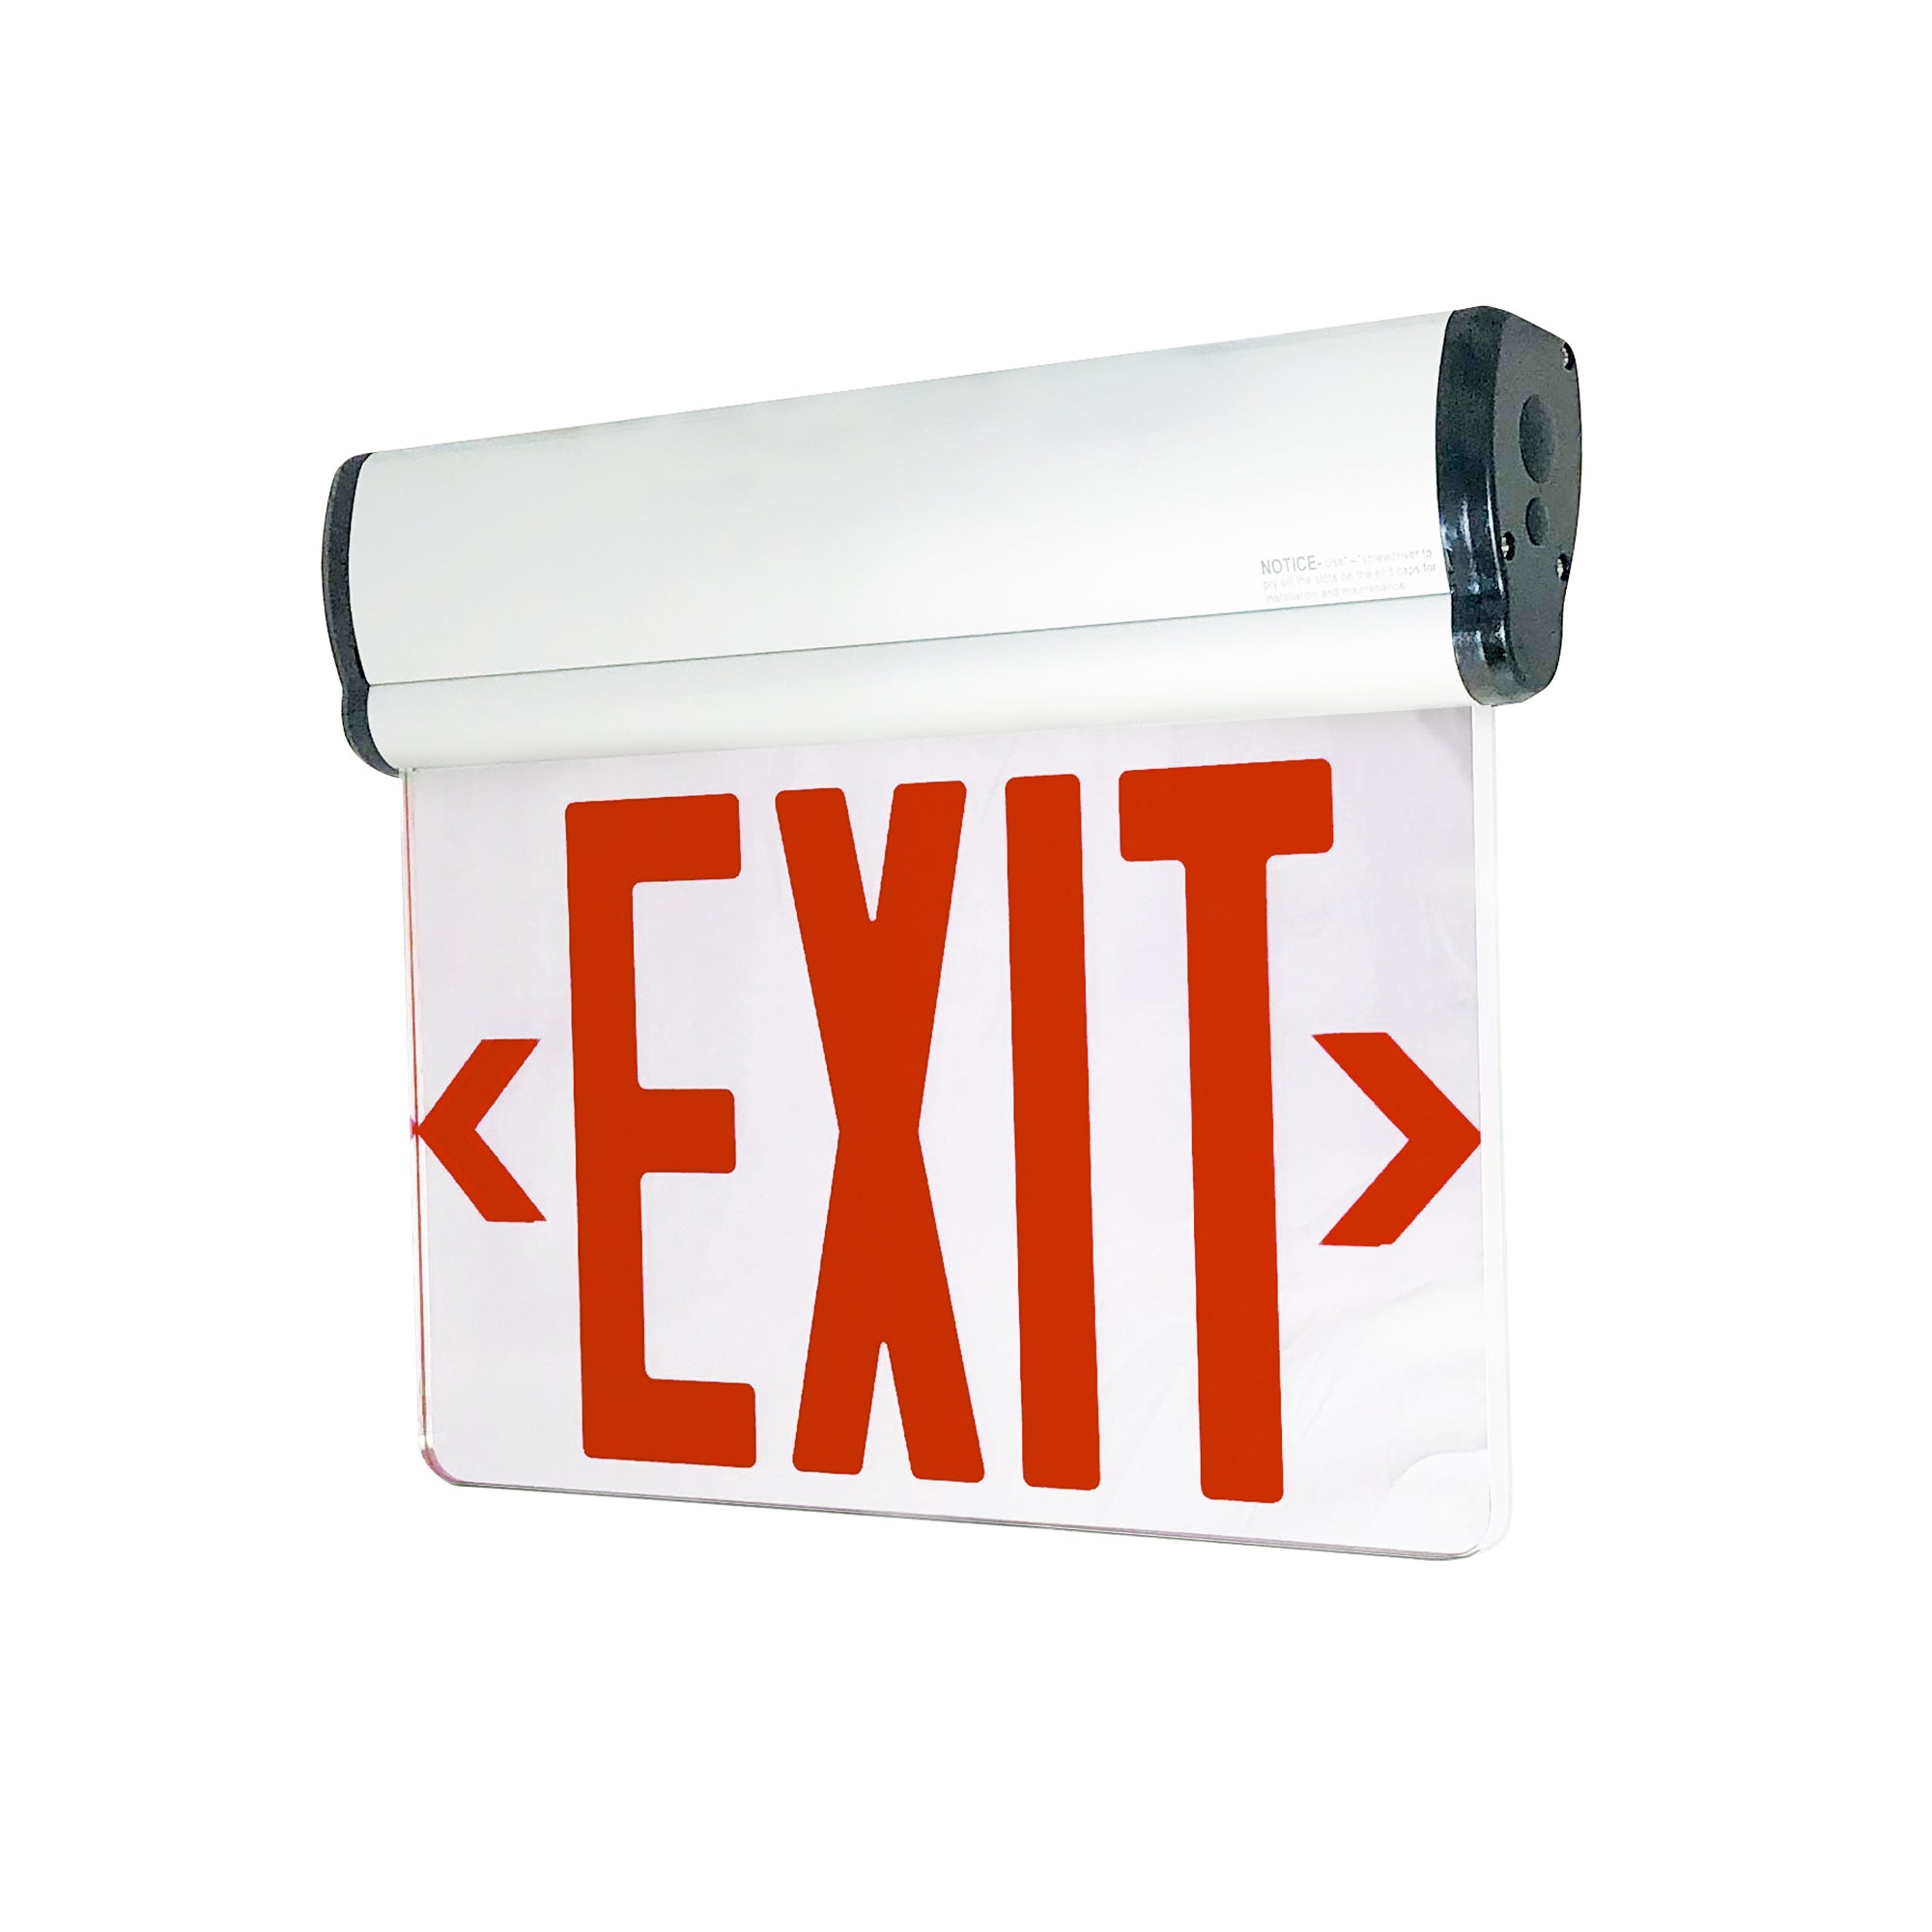 Nora Lighting NX-812-LEDR2MW - Exit / Emergency - Surface Adjustable LED Edge-Lit Exit Sign, Battery Backup, 6 Inch Red Letters, Double Face / Mirrored Acrylic, White Housing